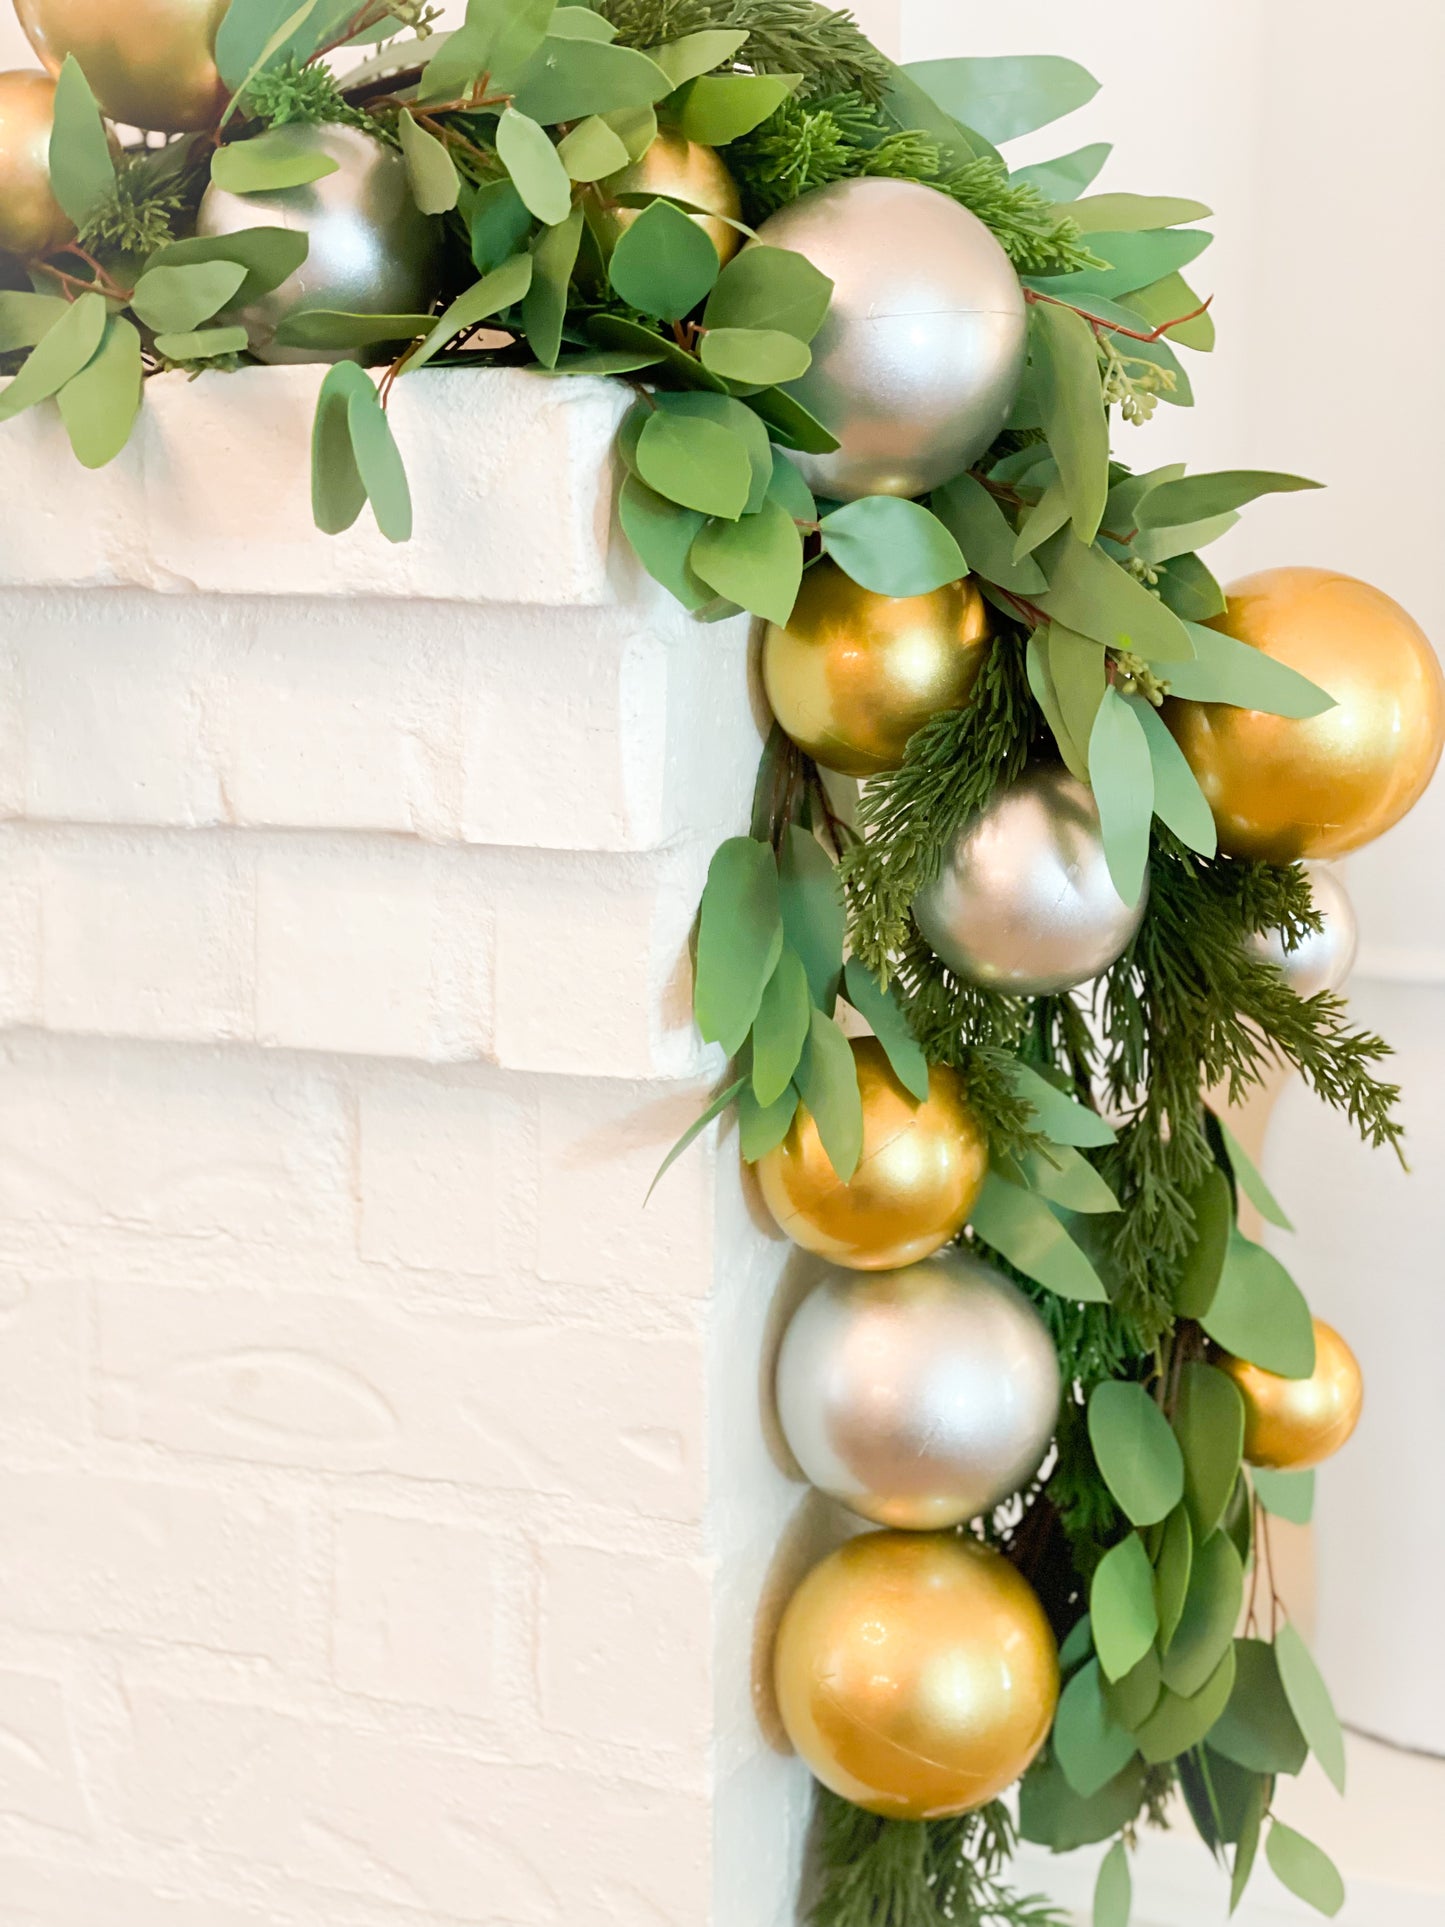 10’ Gold And Silver Matte Ornament Garland